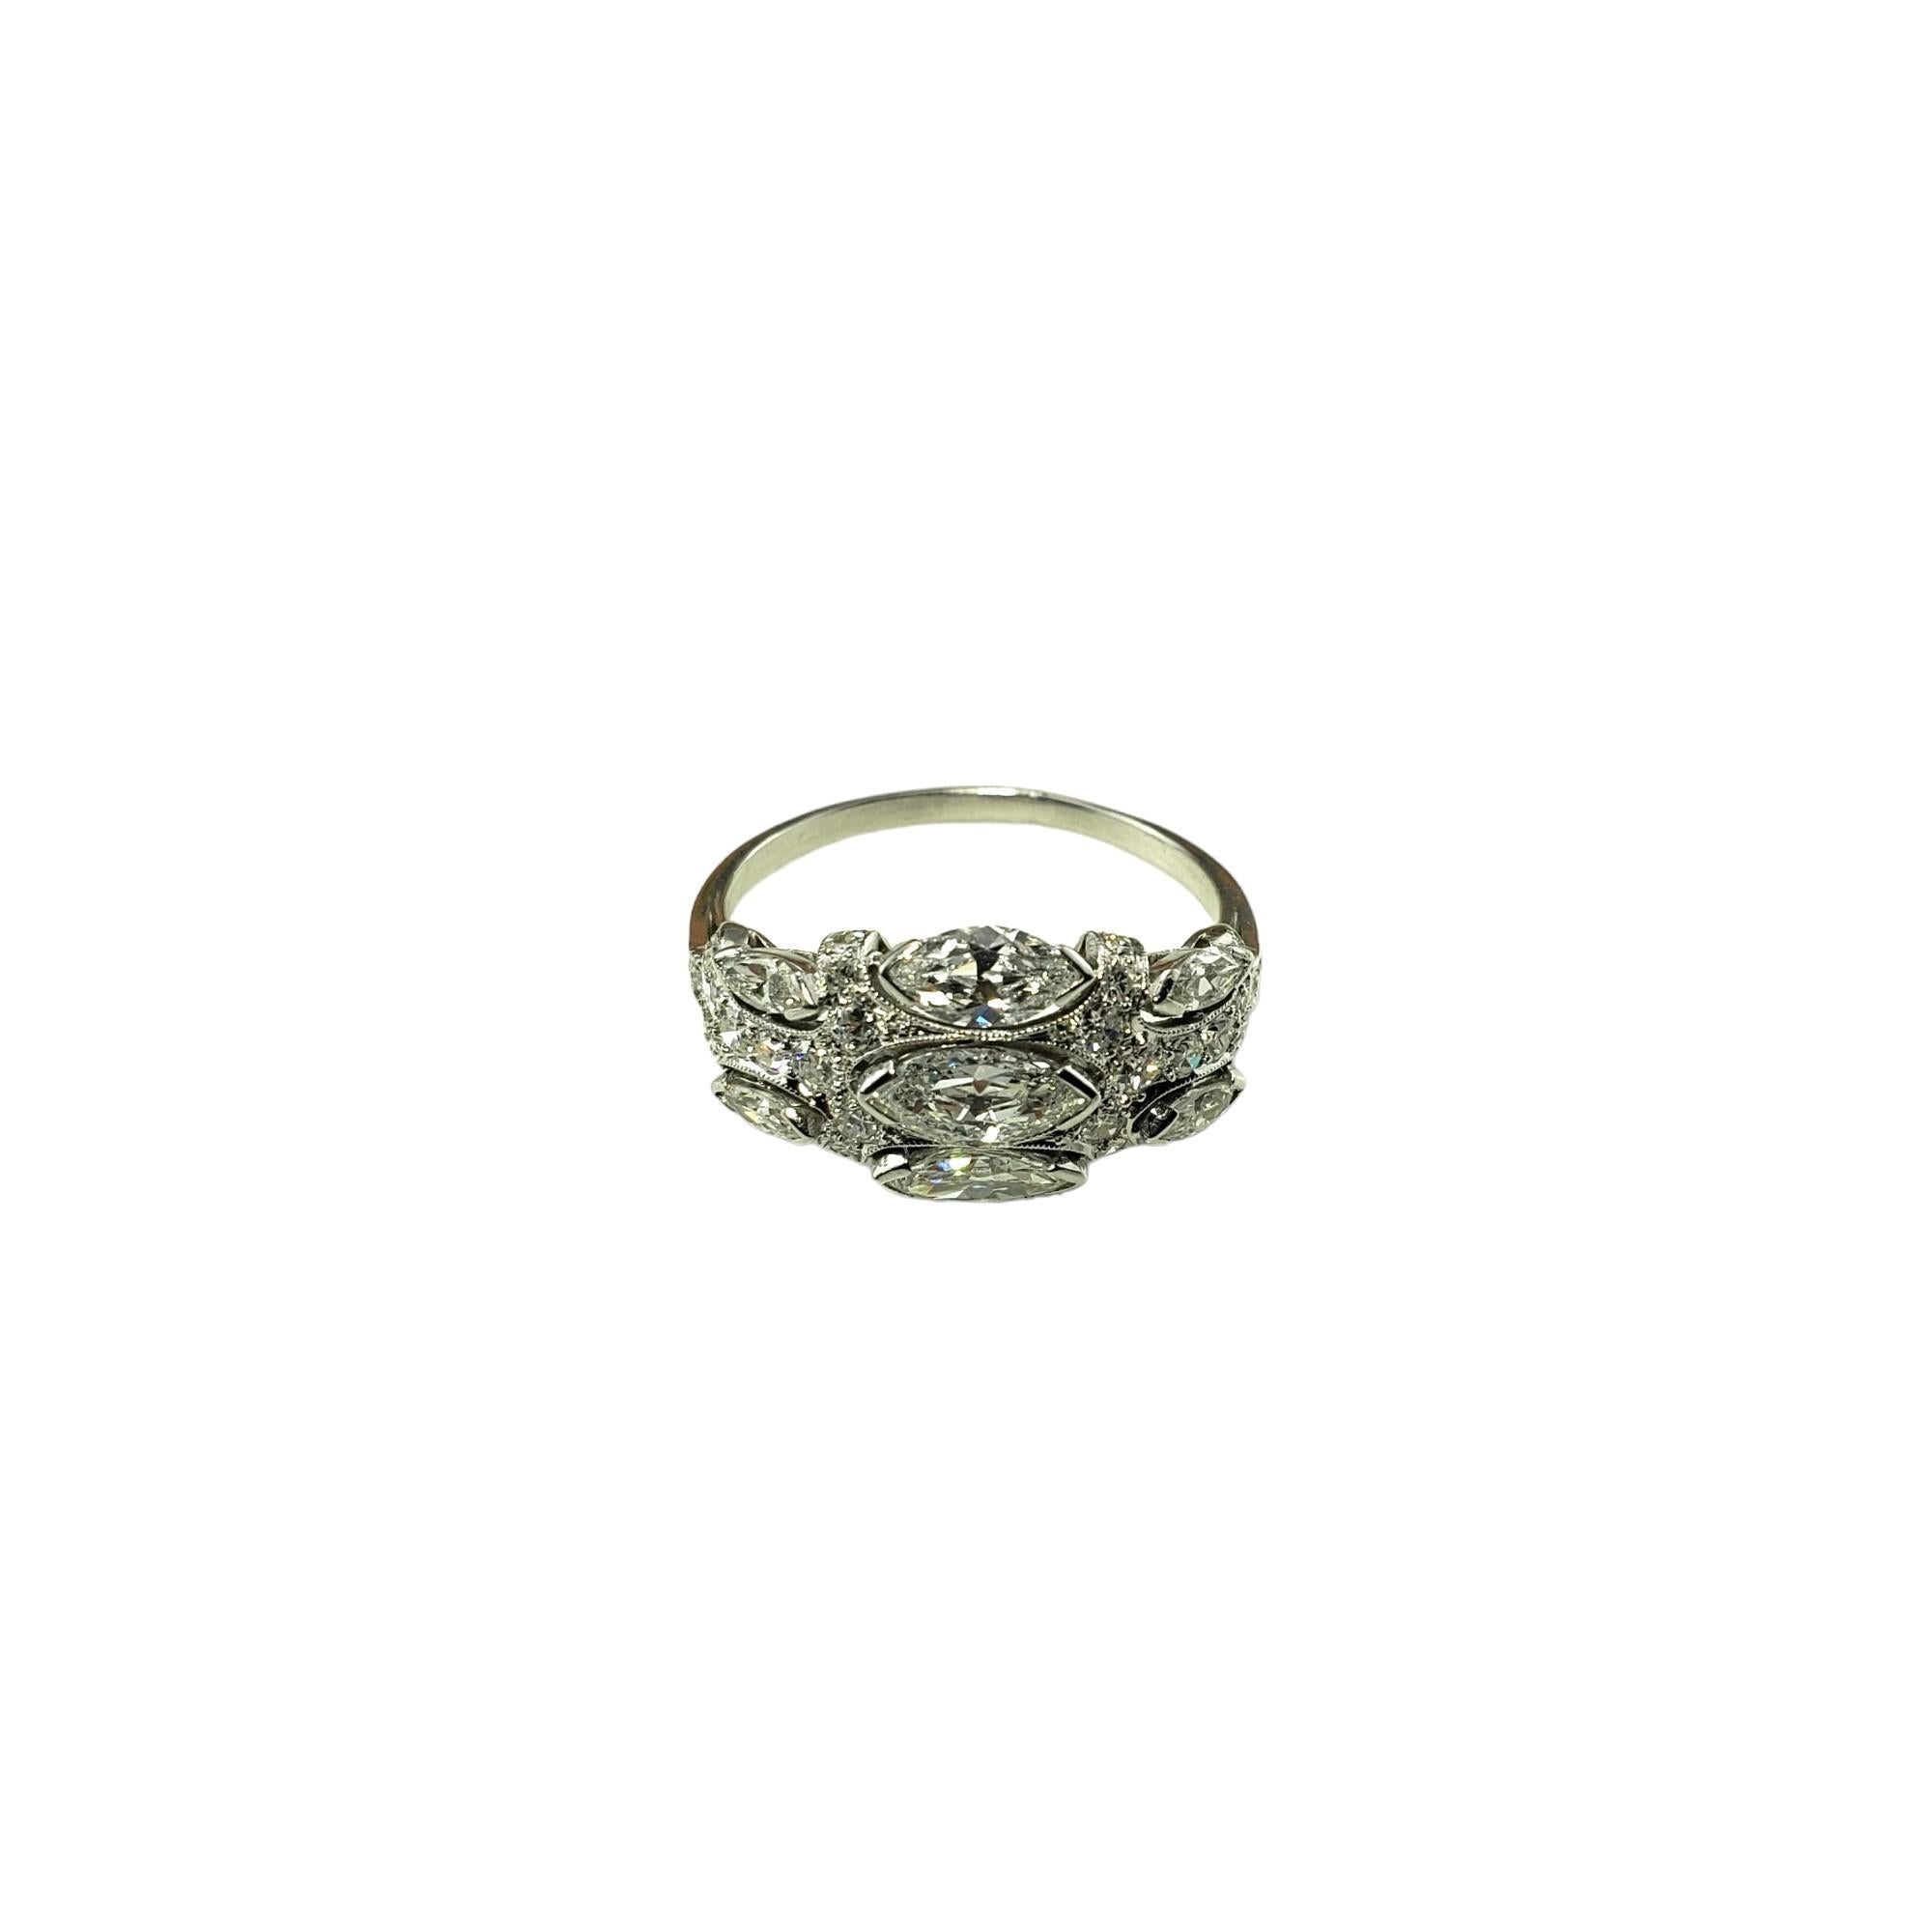 Vintage 14K White Gold Diamond Ring Size 8 JAGi Certified-

This sparkling ring features seven marquise diamonds and 33 single cut diamonds set classic 14K white gold.  Width:  10 mm.  Shank: 1.5 mm.

Total diamond weight:  1.19 ct.

Diamond